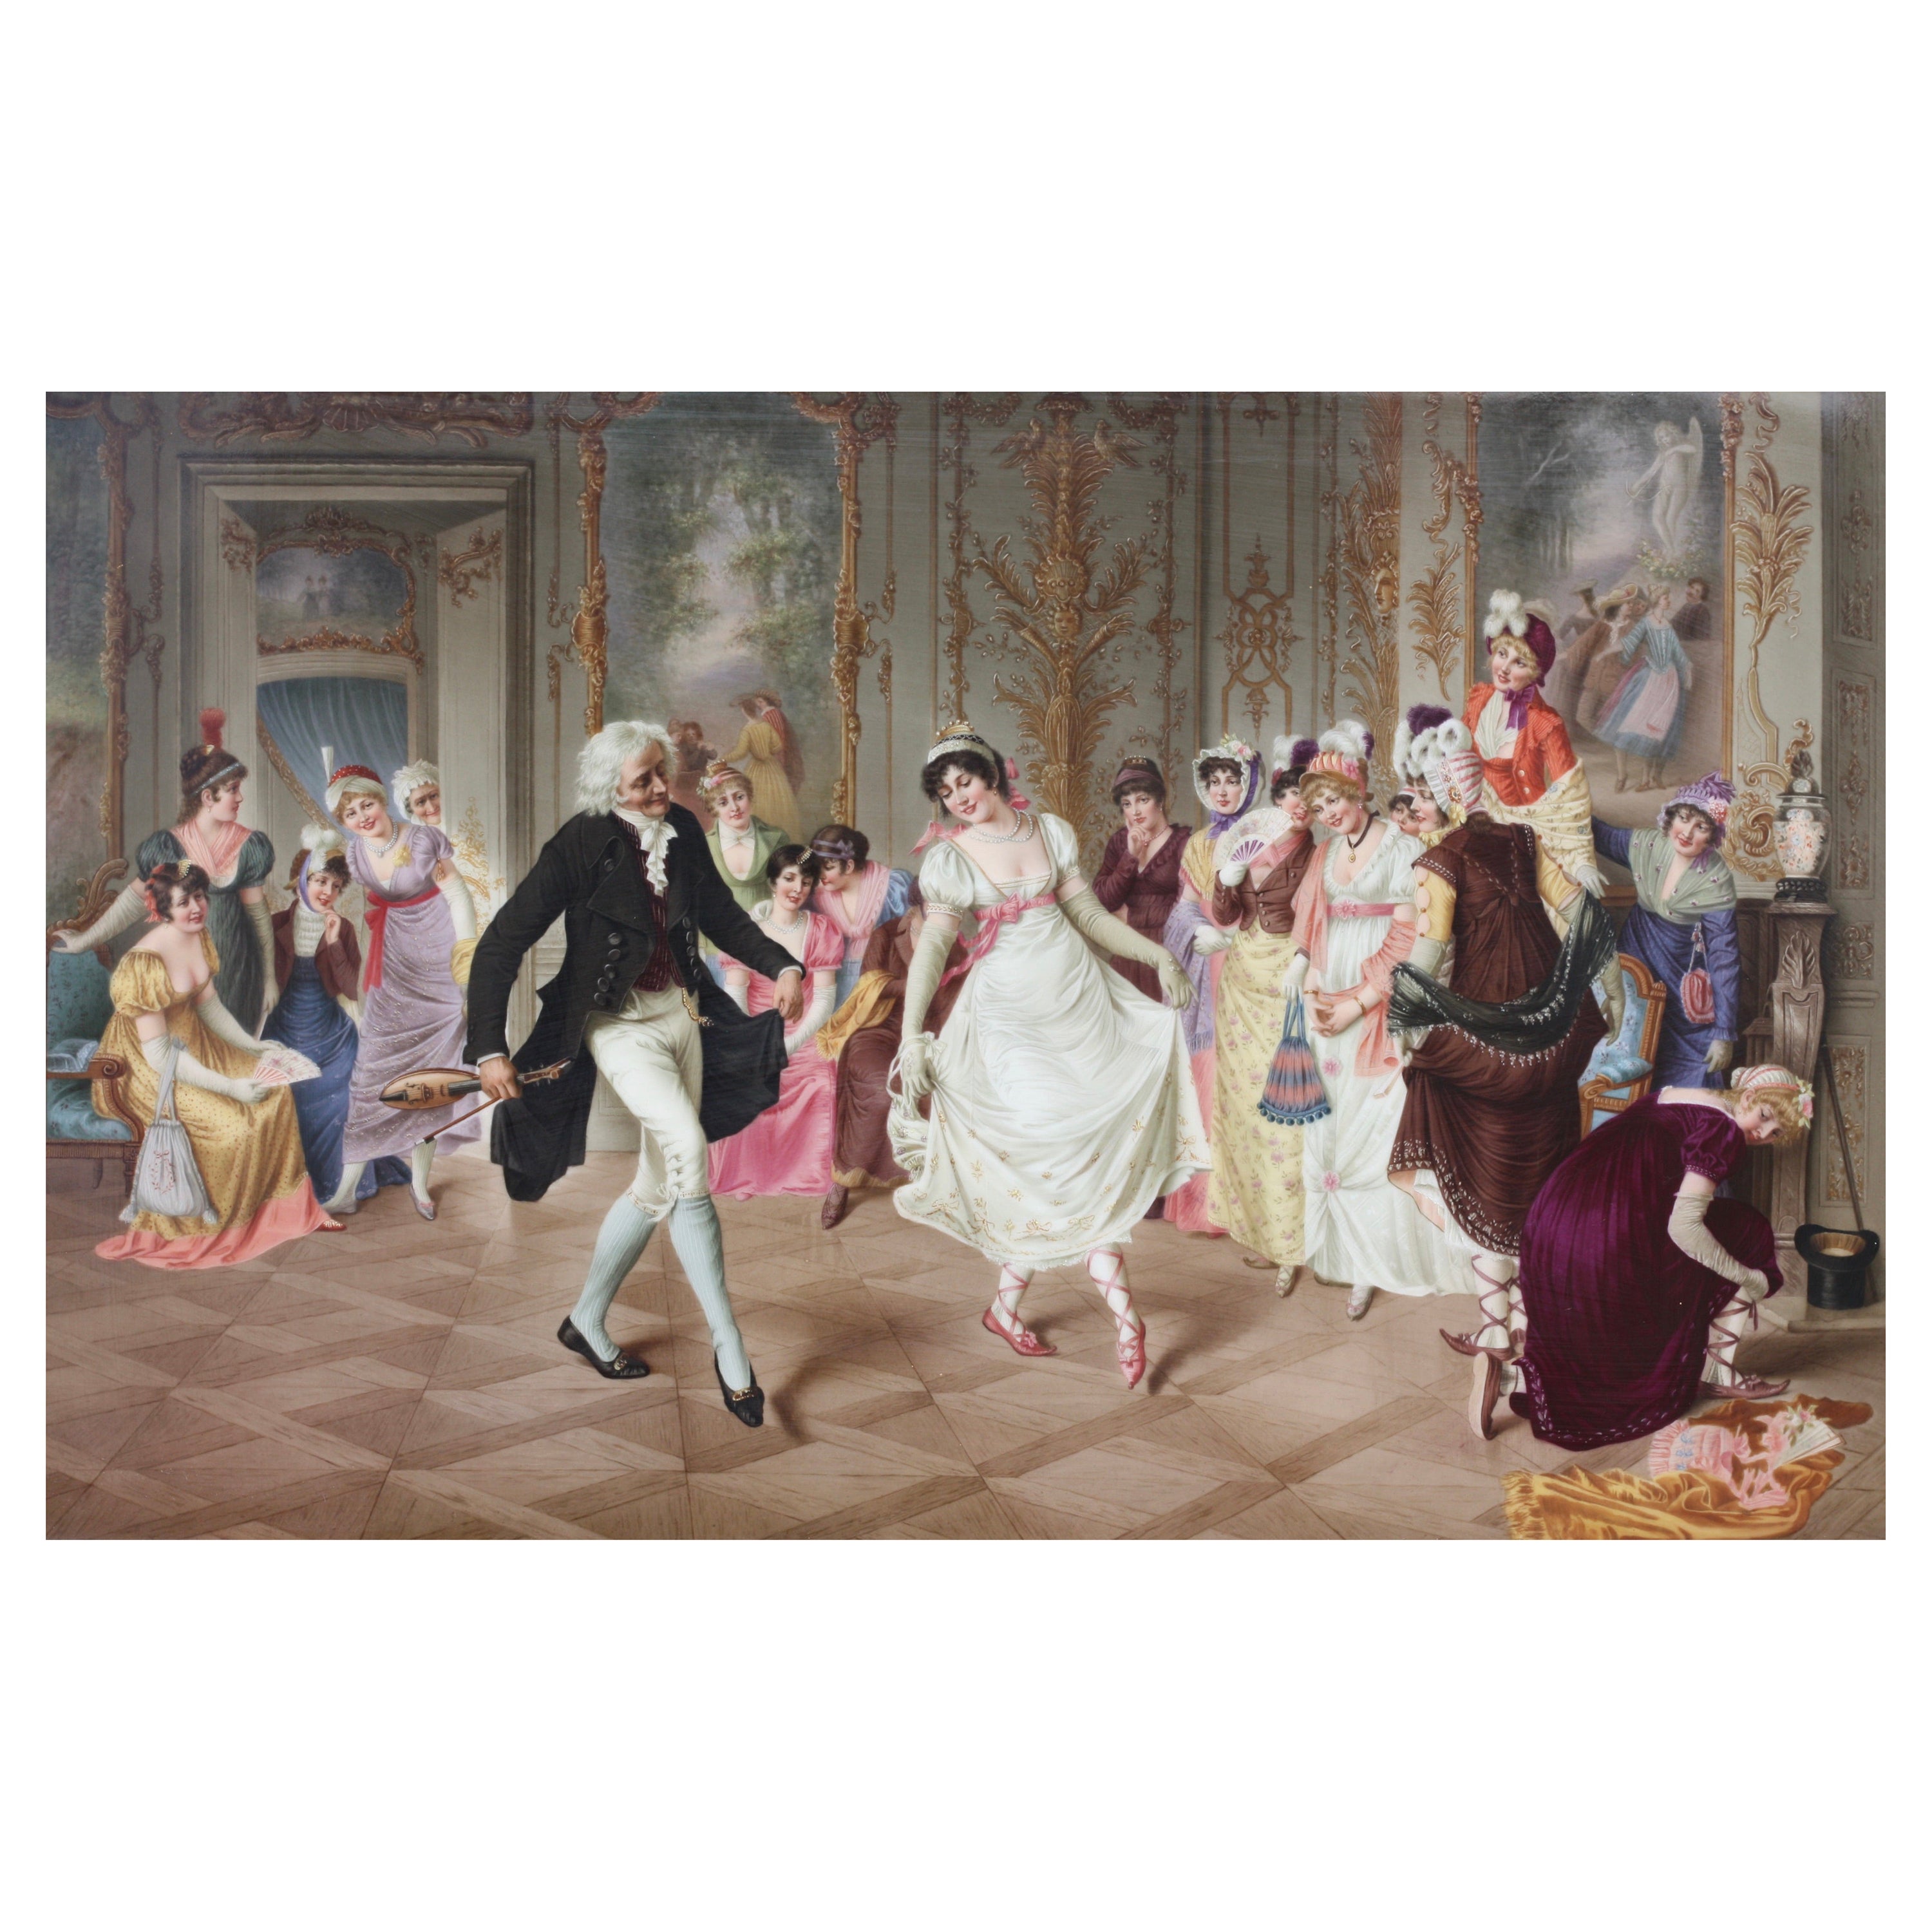 Berlin 'K.P.M.' Painted Rectangular Plaque, "the Dance", Late 19th Century For Sale